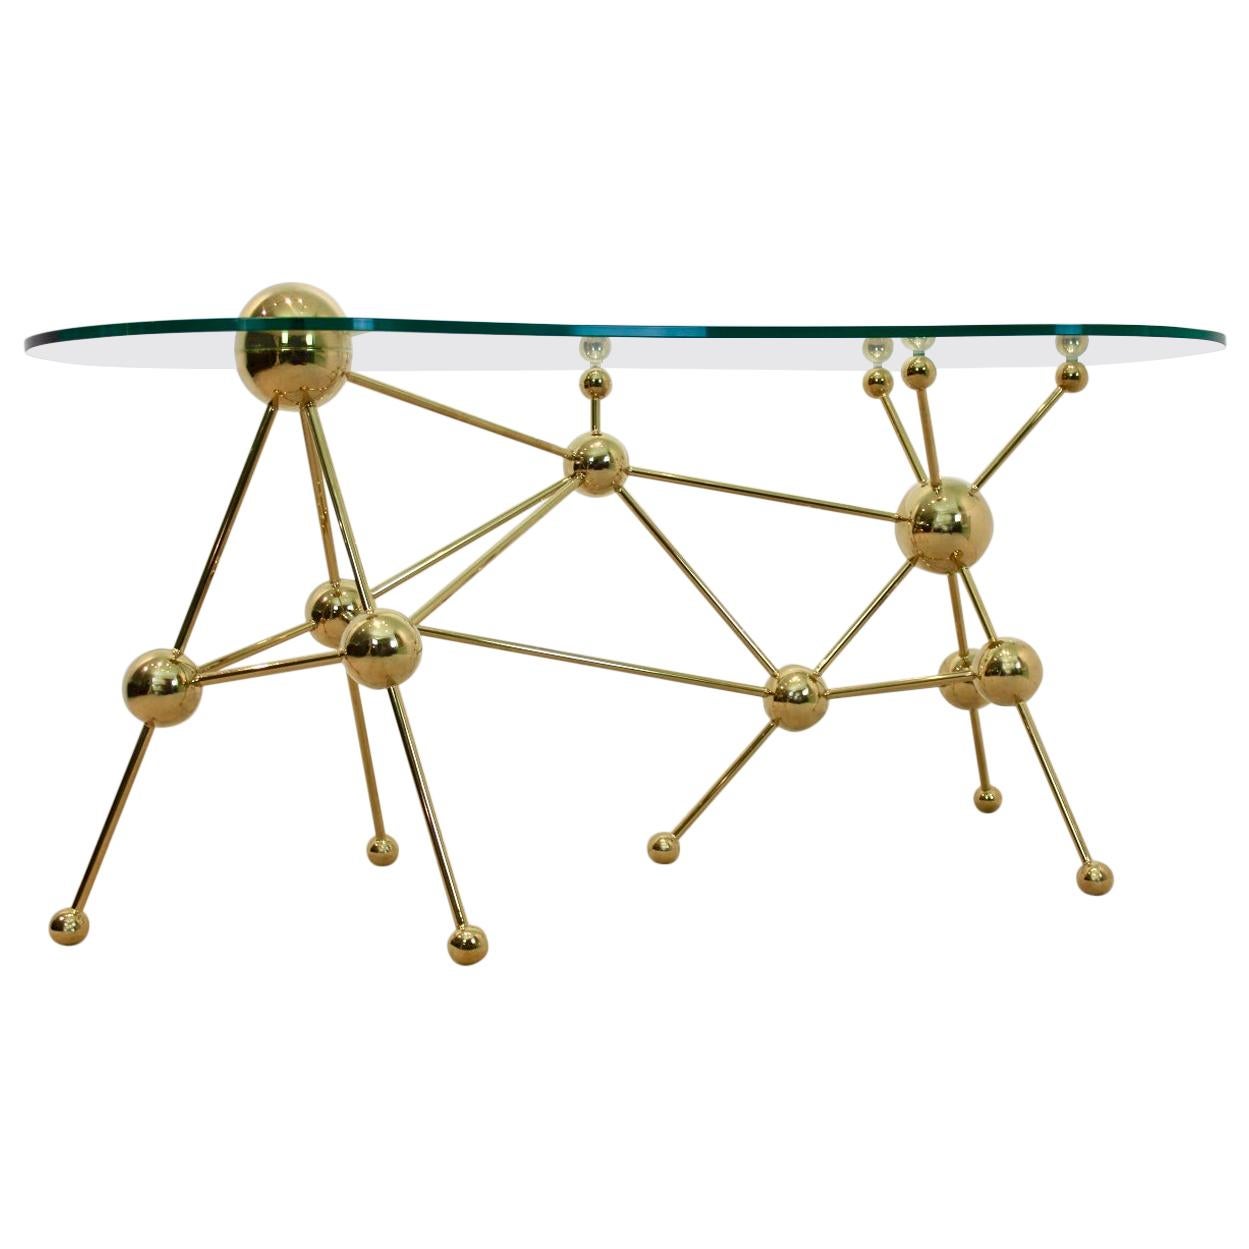 Sputnik Desk or Table with Brass Legs and Glass Top